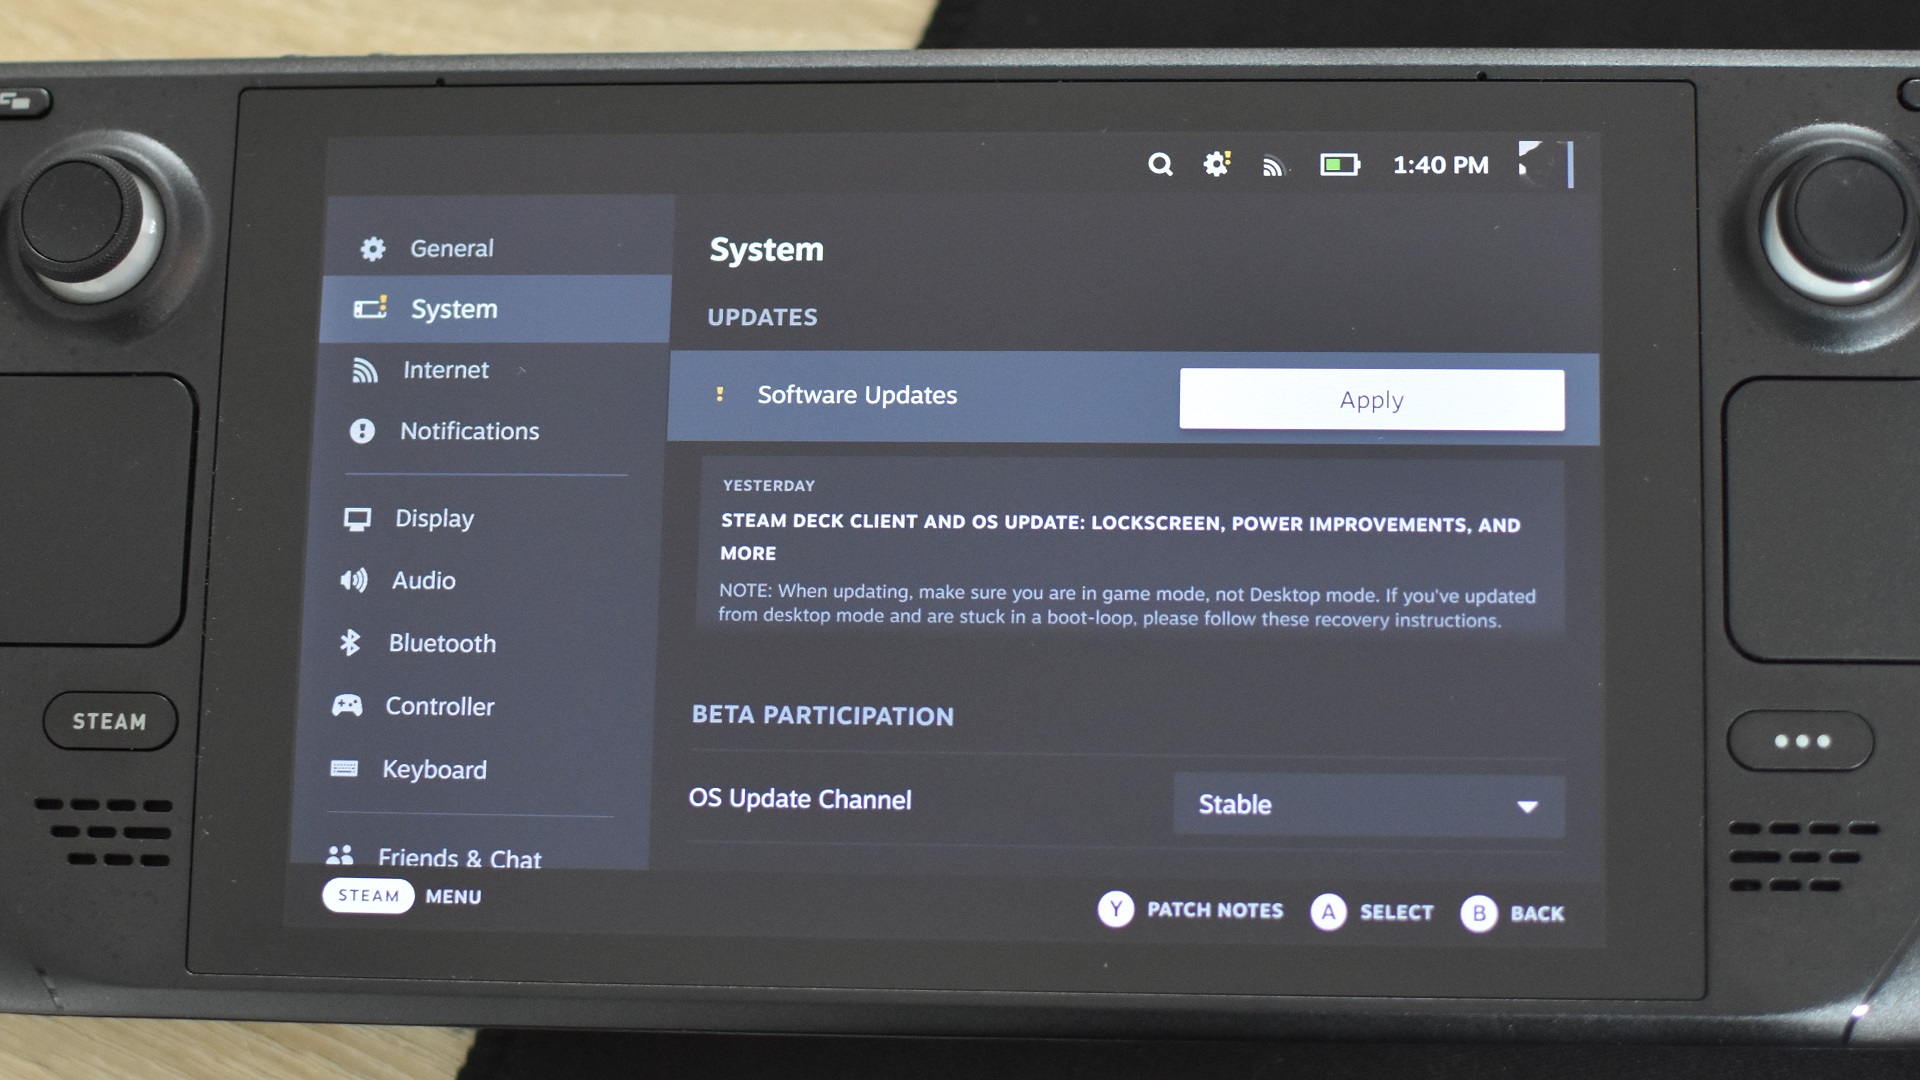 Step 1 of how to set the Steam Deck lock screen: Apply the latest software update in the Steam Deck's System settings.